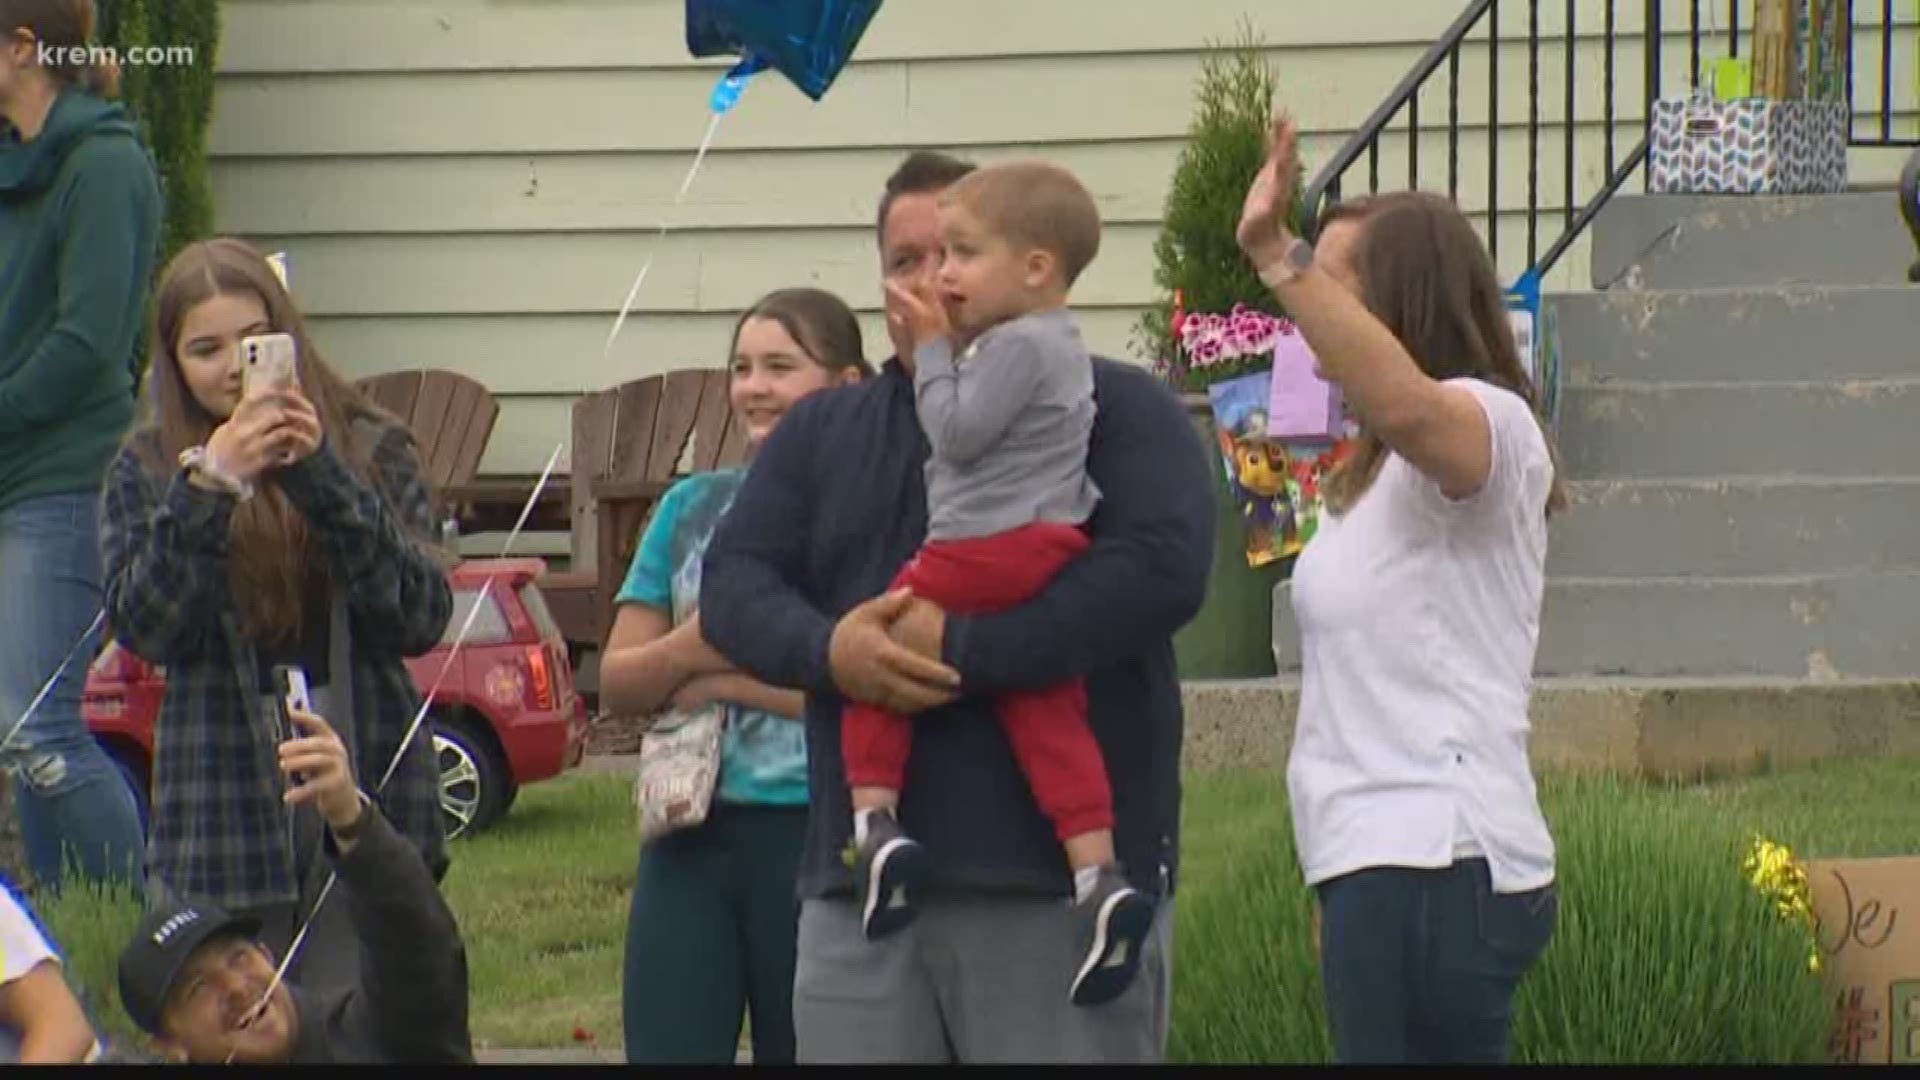 Three-year-old Eli told the Make a Wish foundation that he loves fire trucks, so some local fire engines organized a parade for his birthday.